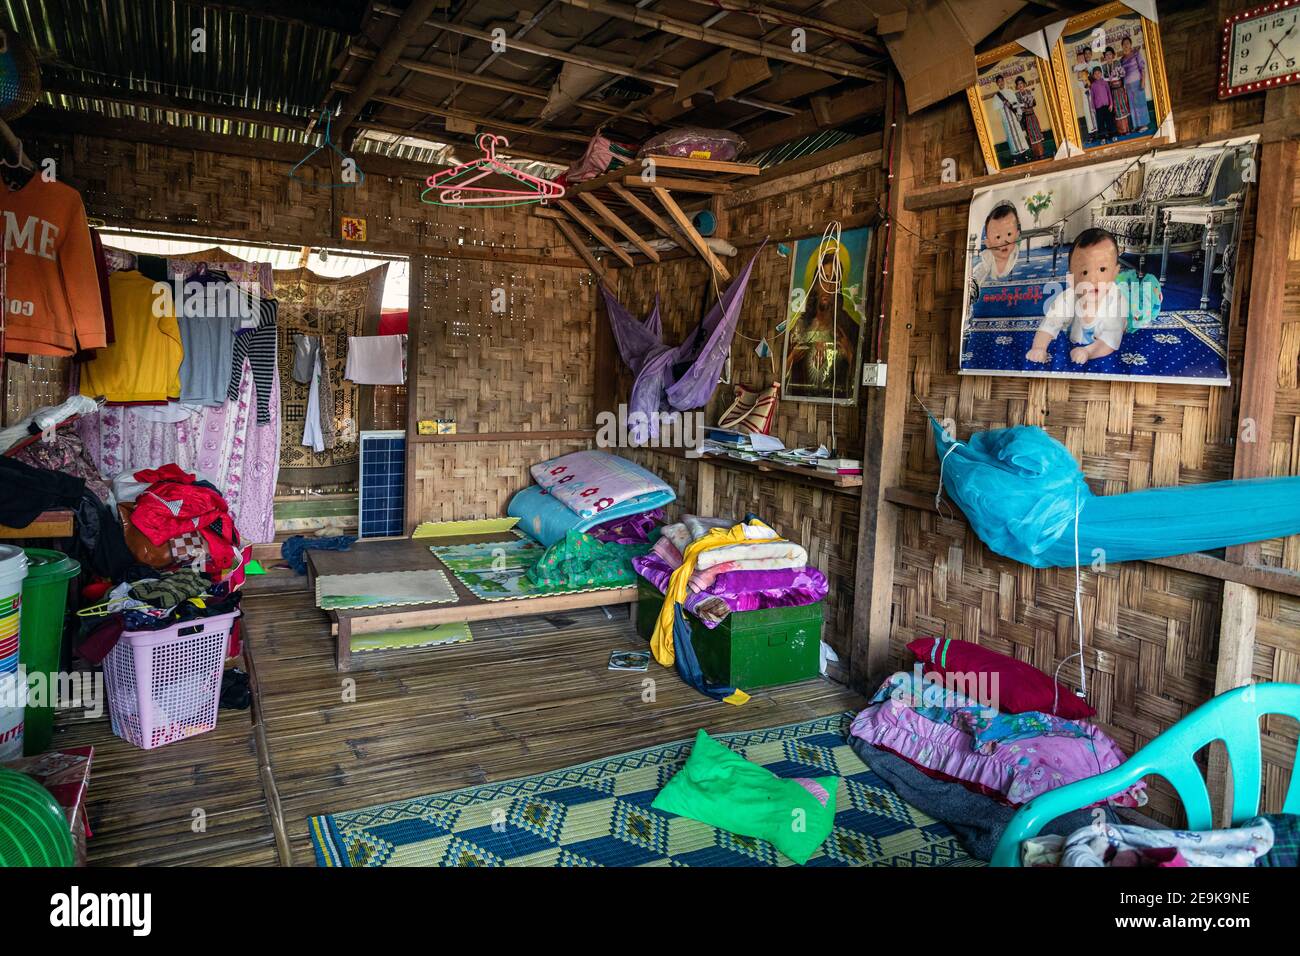 Daily life of the refugees in Shatapru IDP refugee camp in Myikyina, Myanmar. Each family has a room in the poor huts. Stock Photo